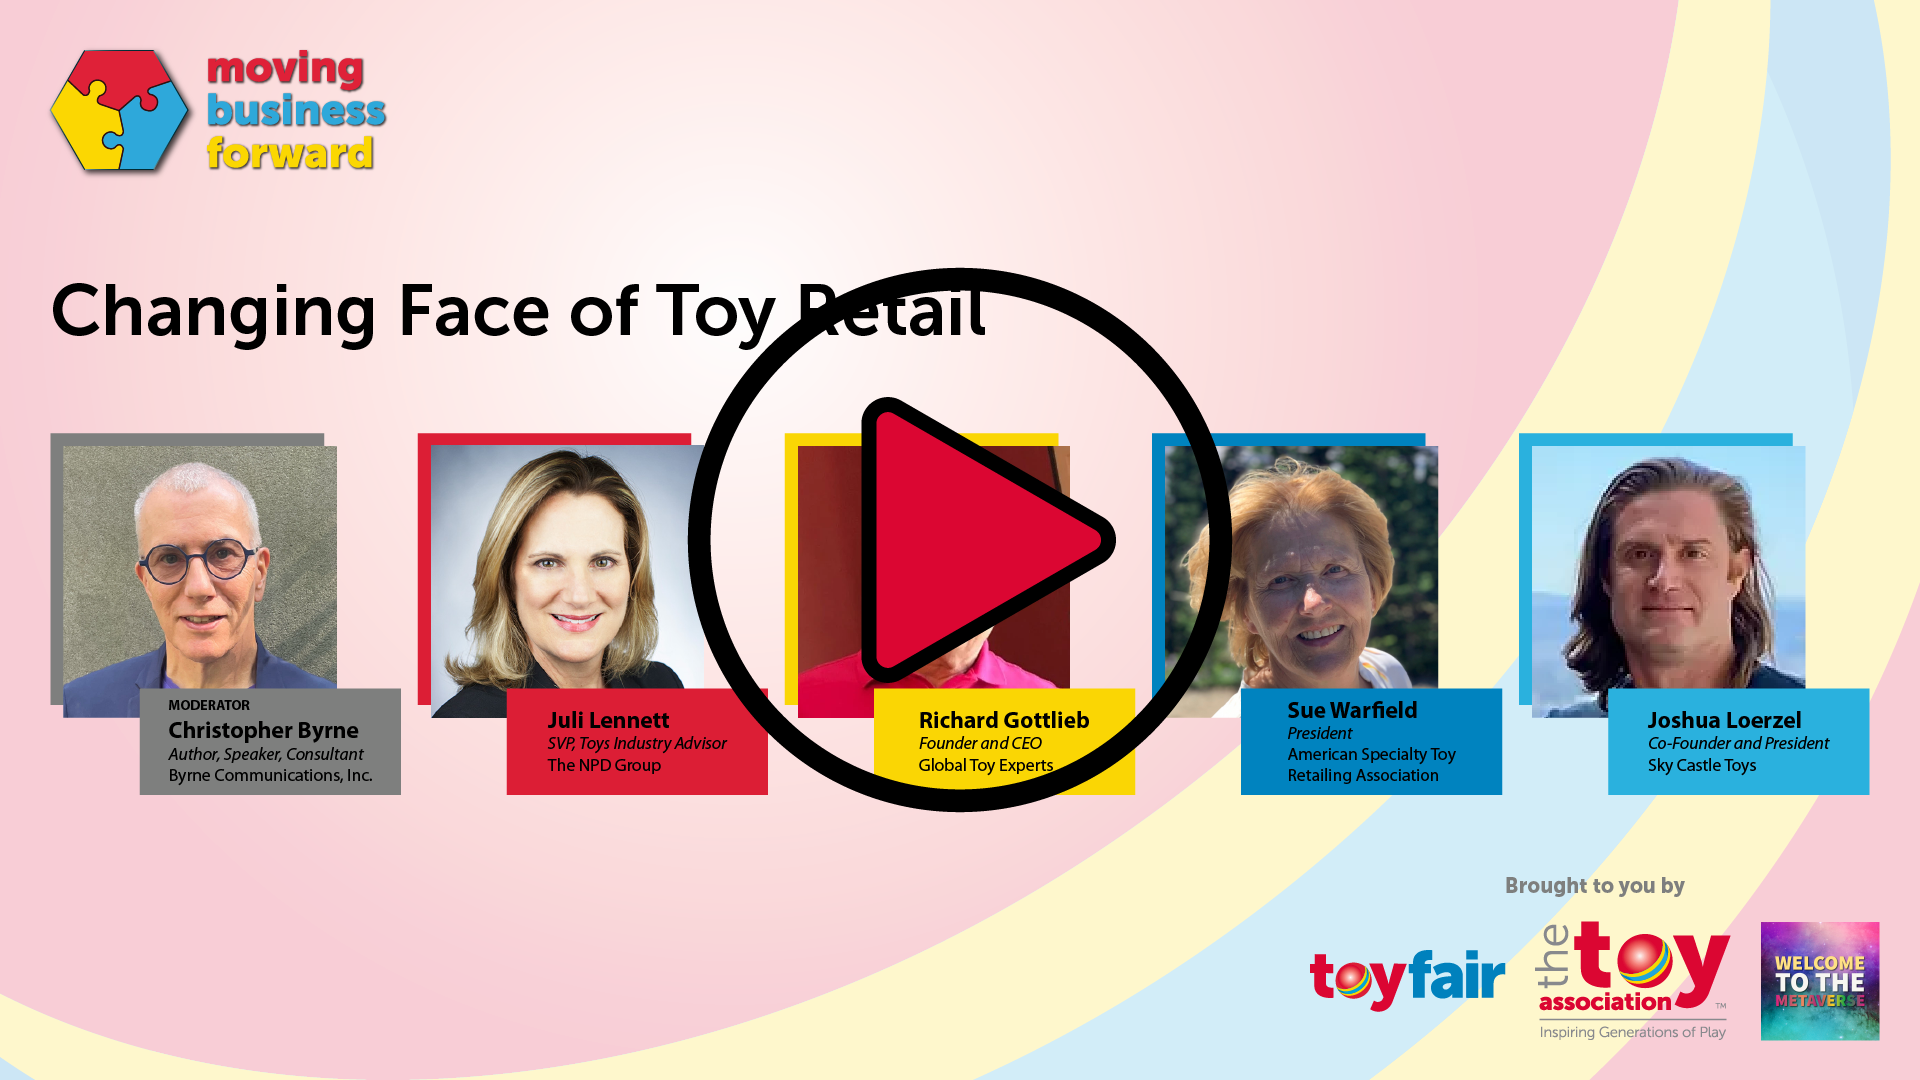 Changing Face of Toy Retail